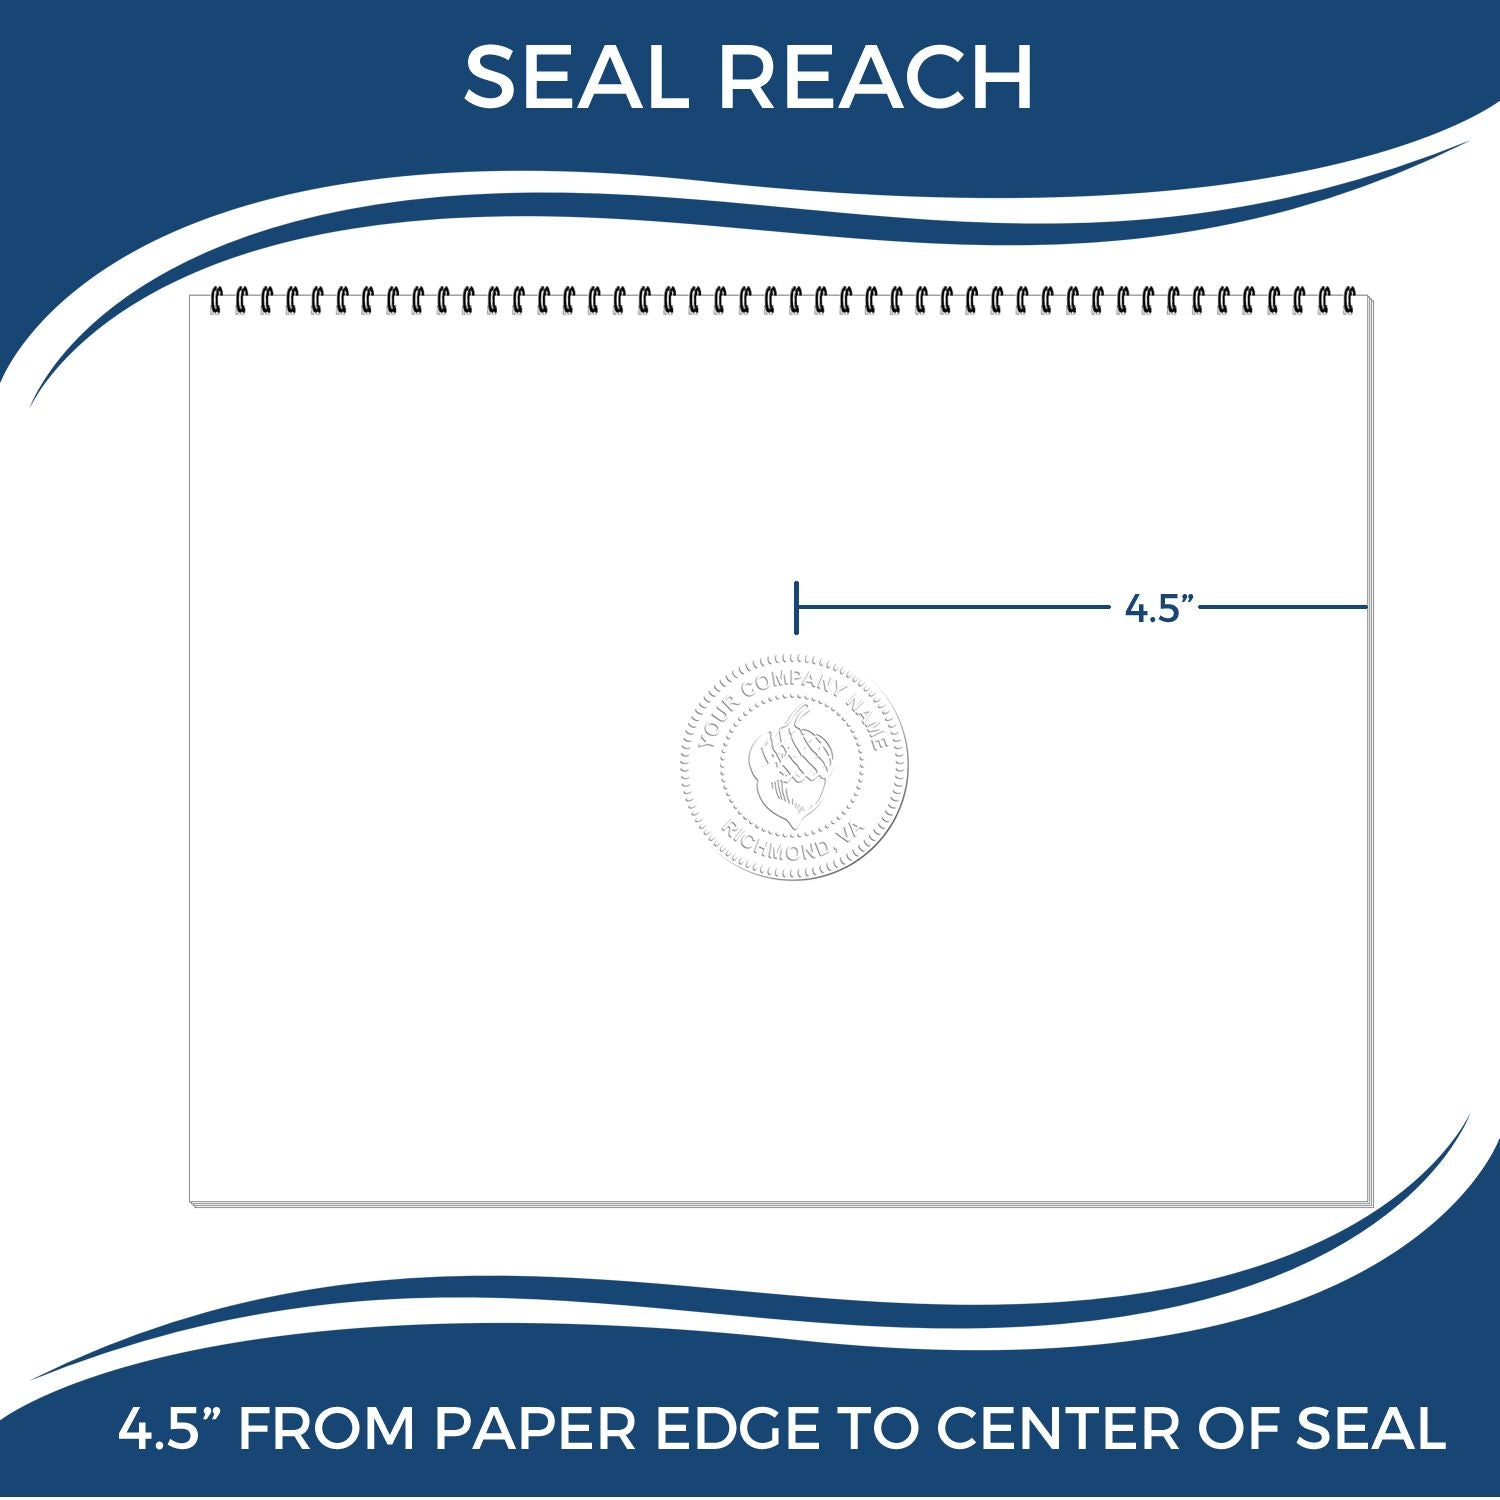 An infographic showing the seal reach which is represented by a ruler and a miniature seal image of the State of Ohio Extended Long Reach Geologist Seal